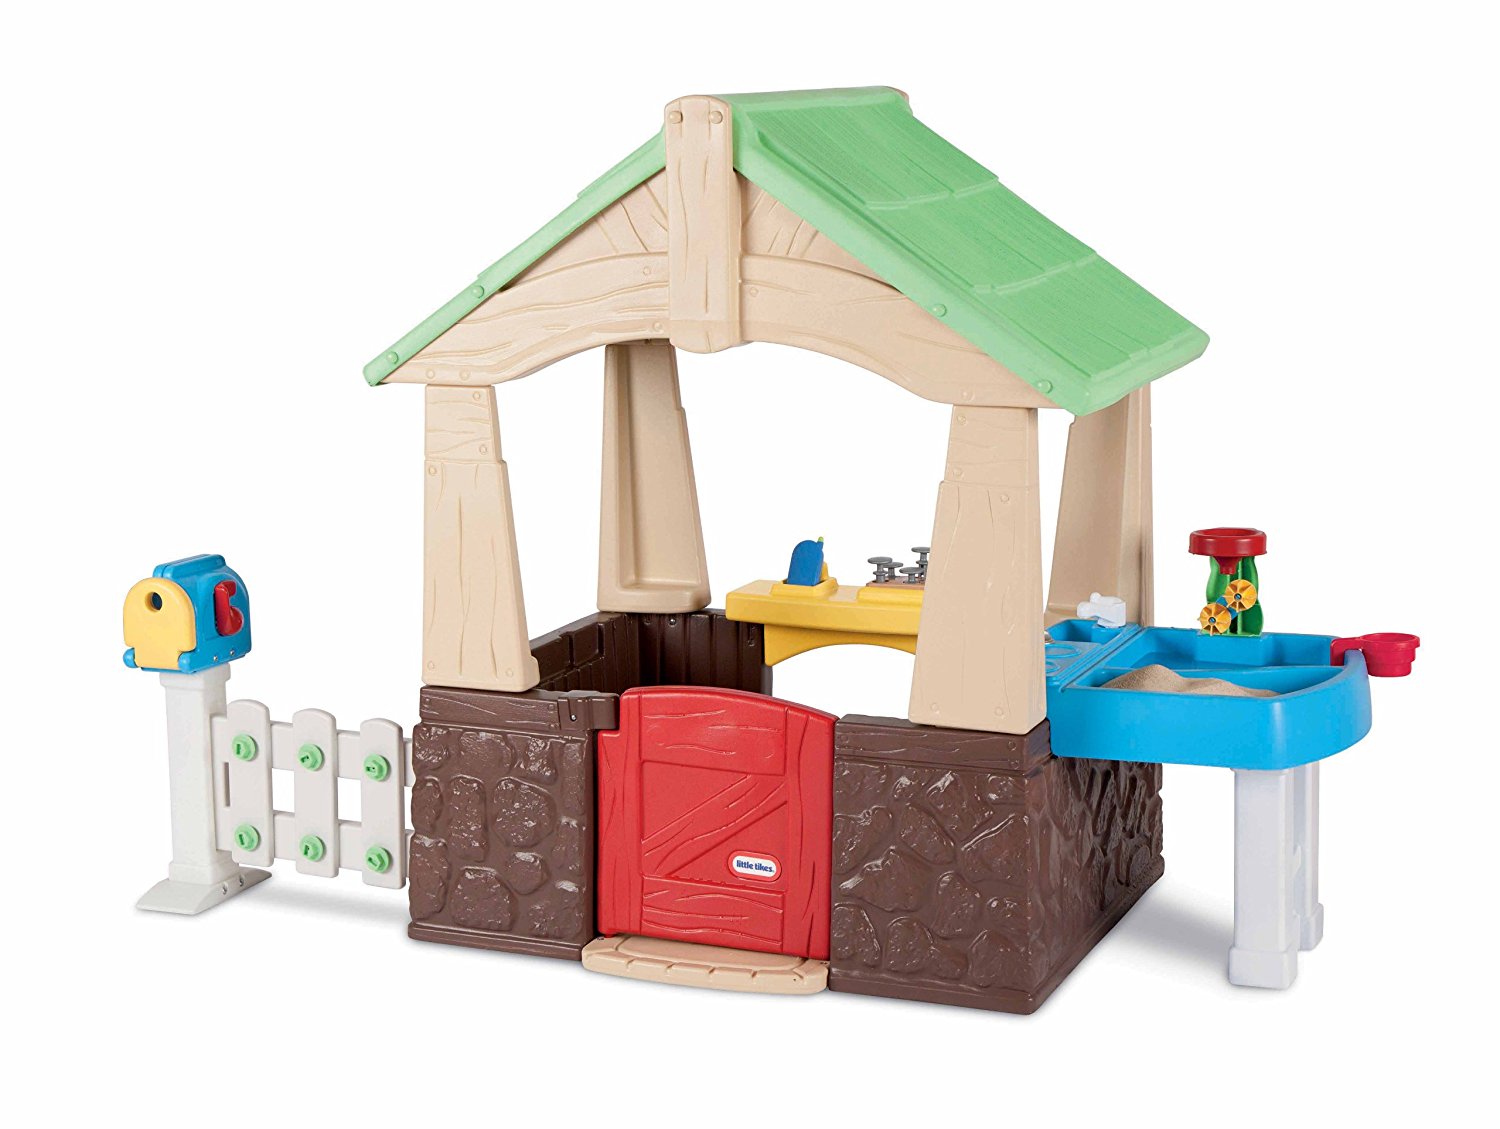 toys r us outdoor playhouse